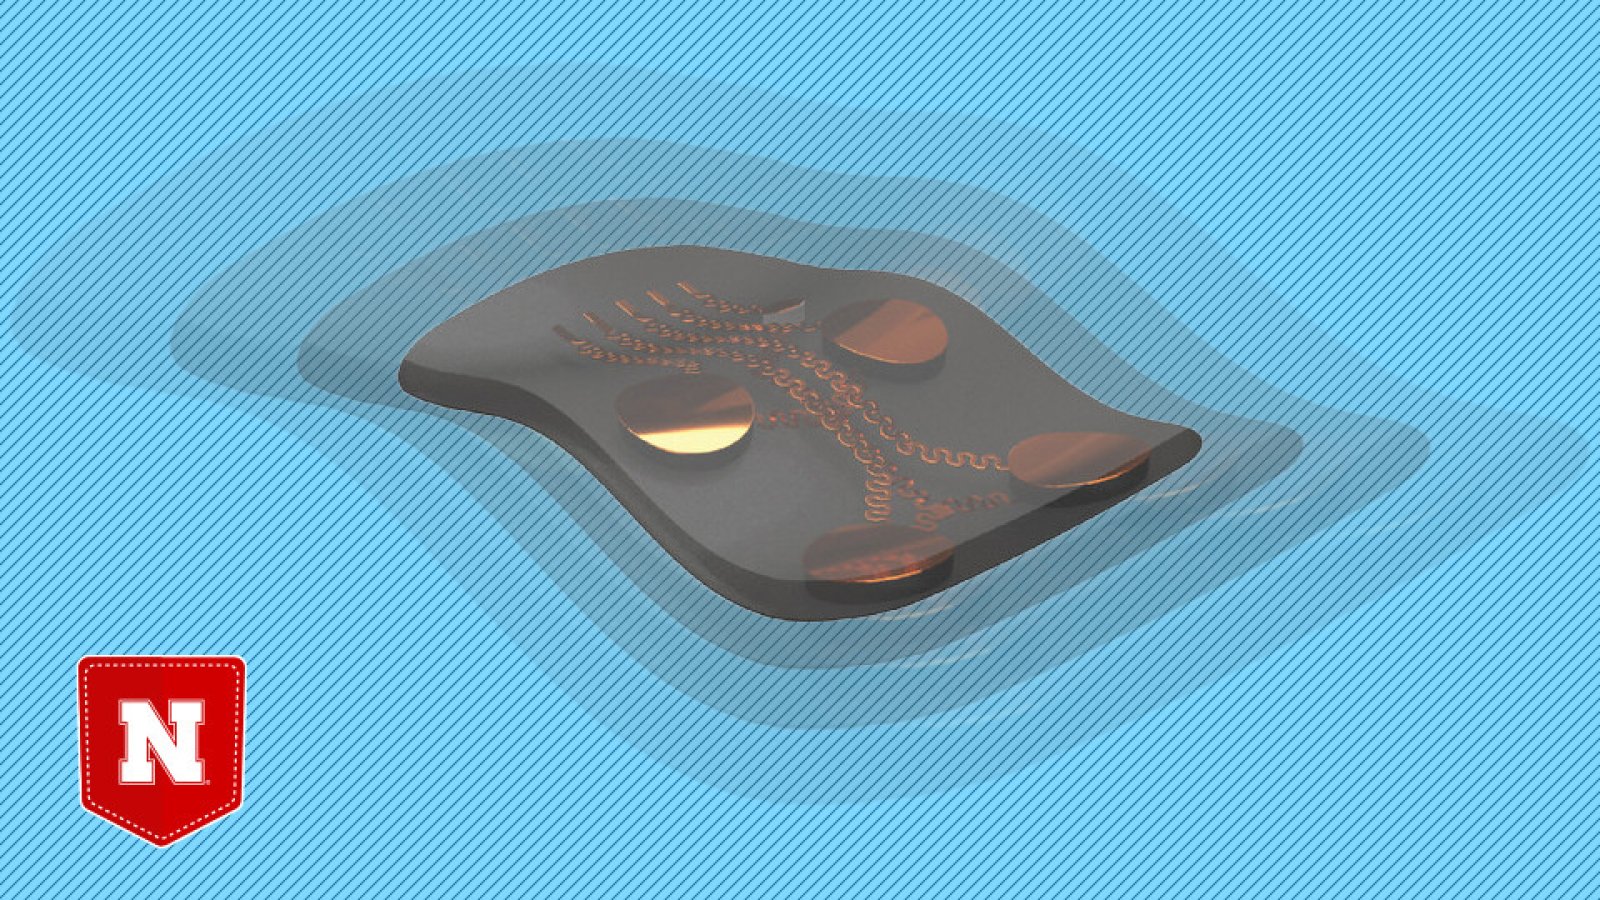 A rendering of a stretchable ultrasound device designed by Husker engineers. (Adapted from a figure in Advanced Functional Materials)